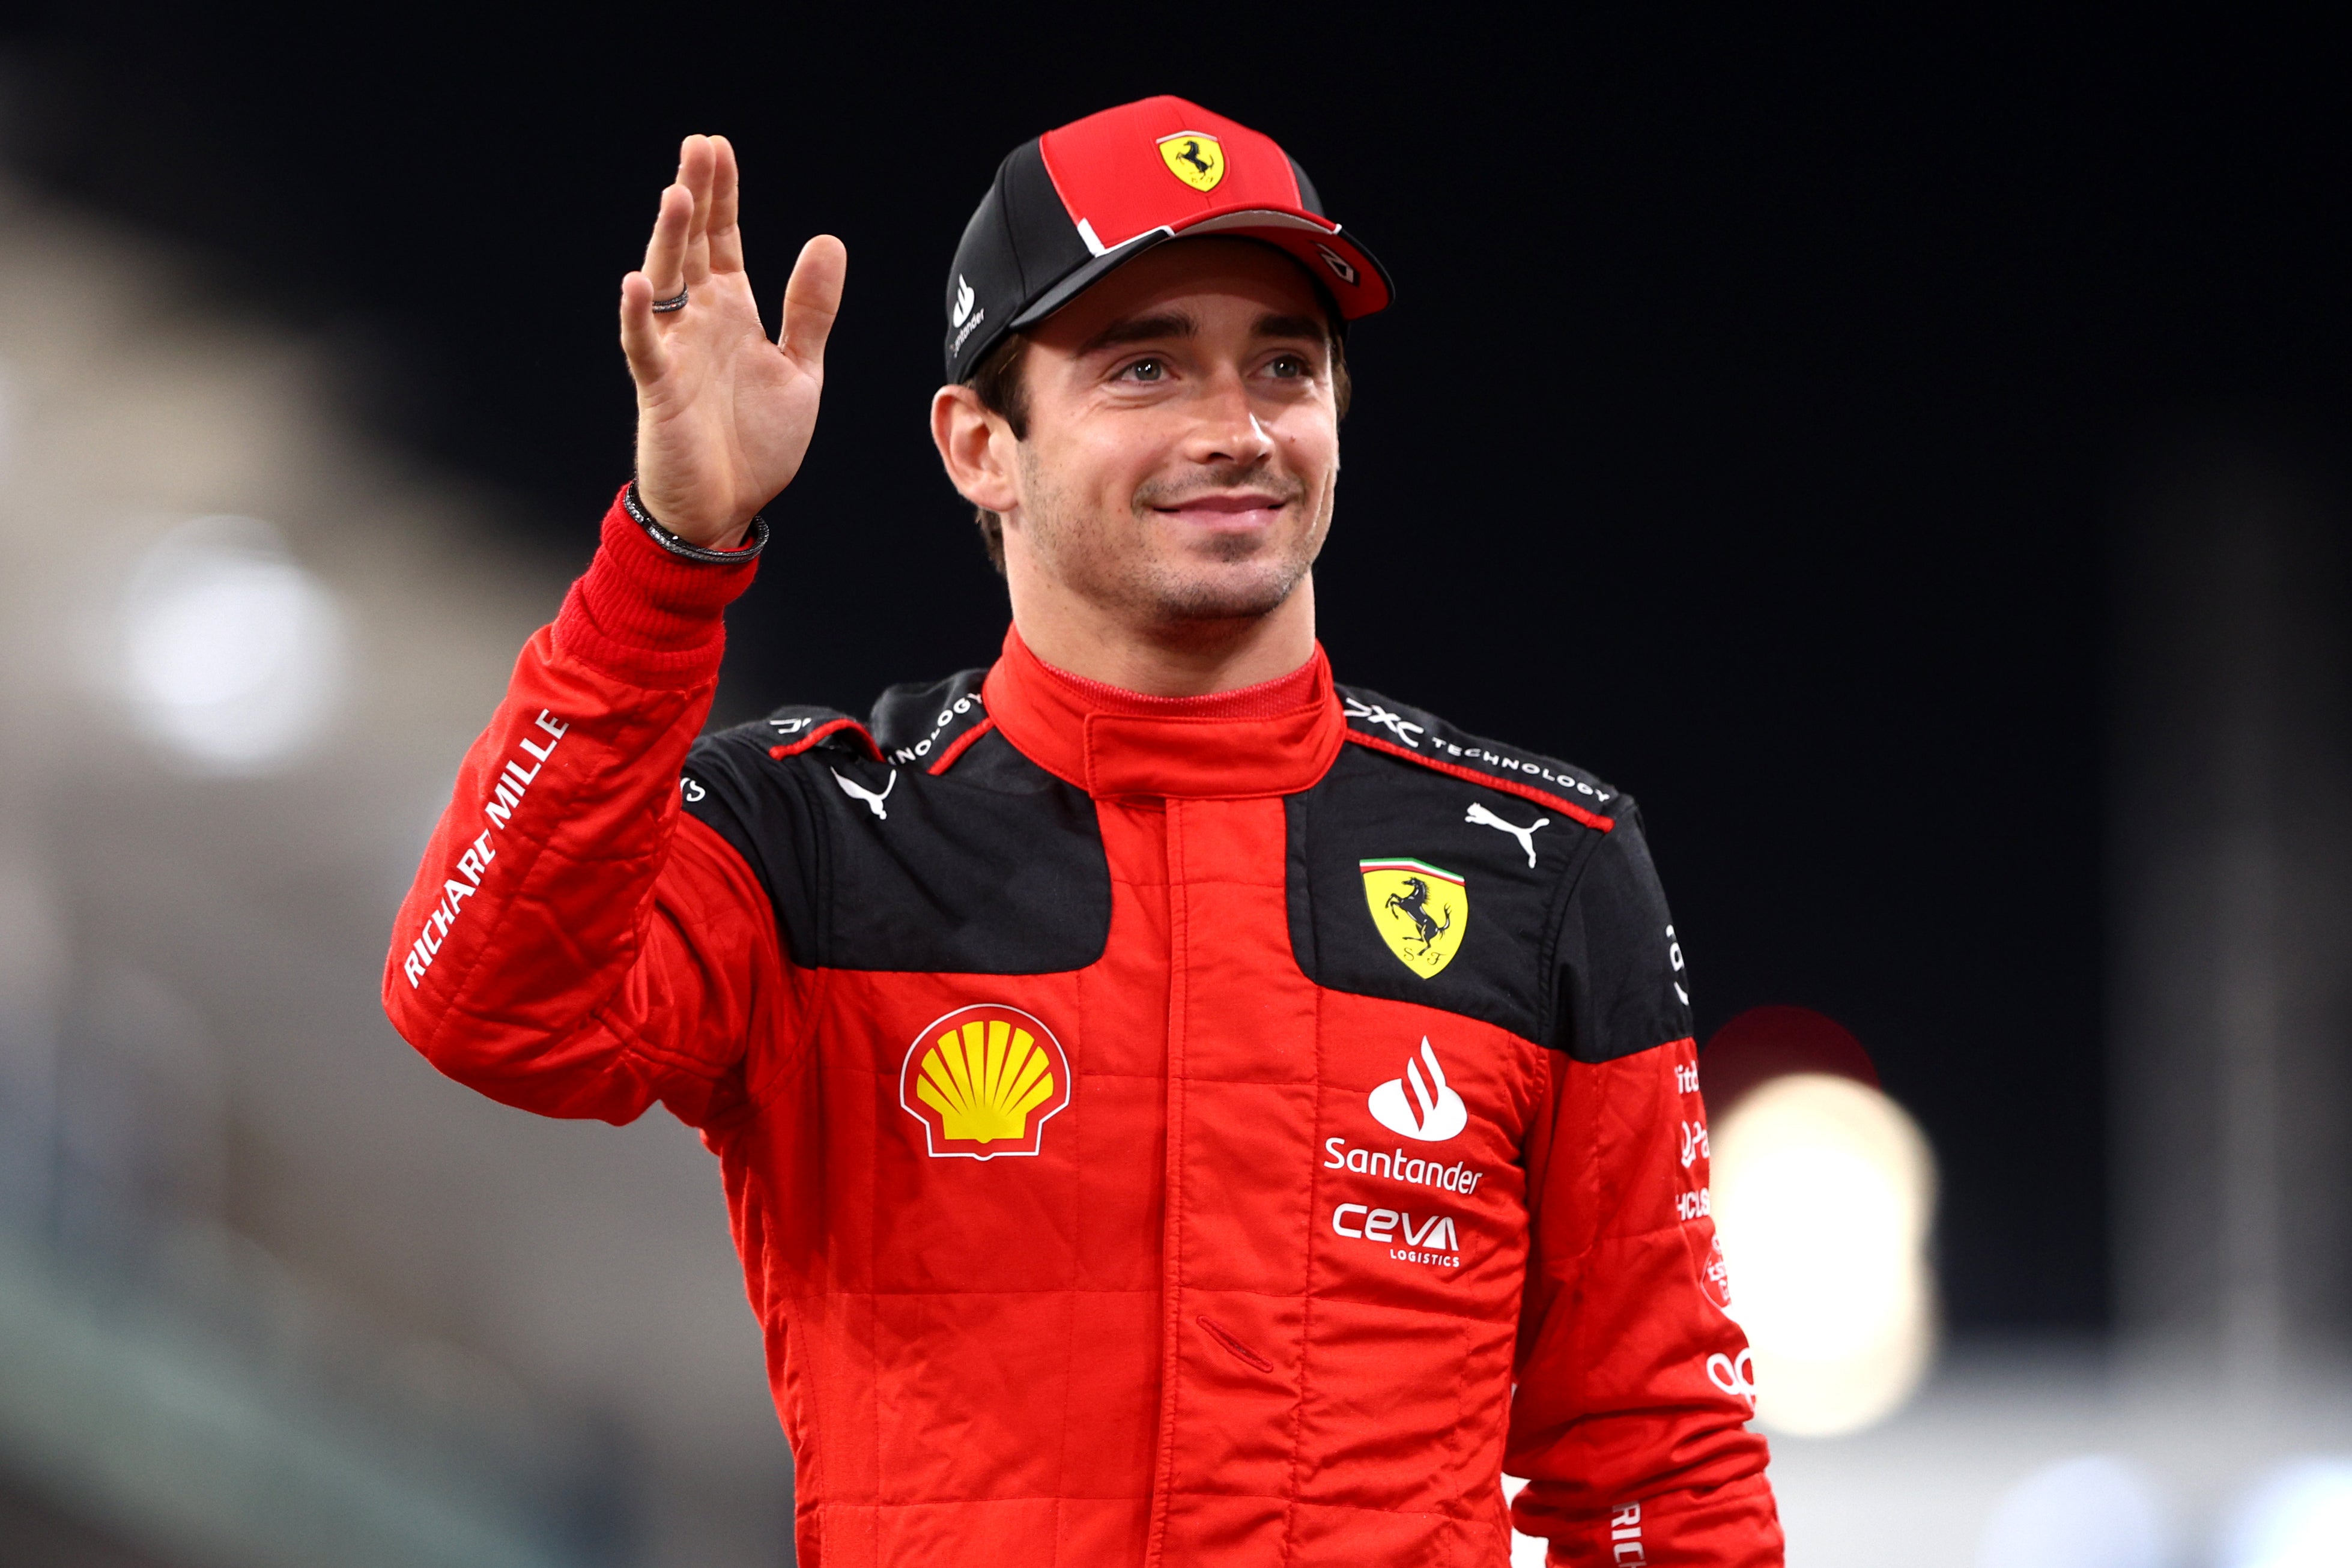 Charles Leclerc has reportedly agreed a new five-year deal with Ferrari